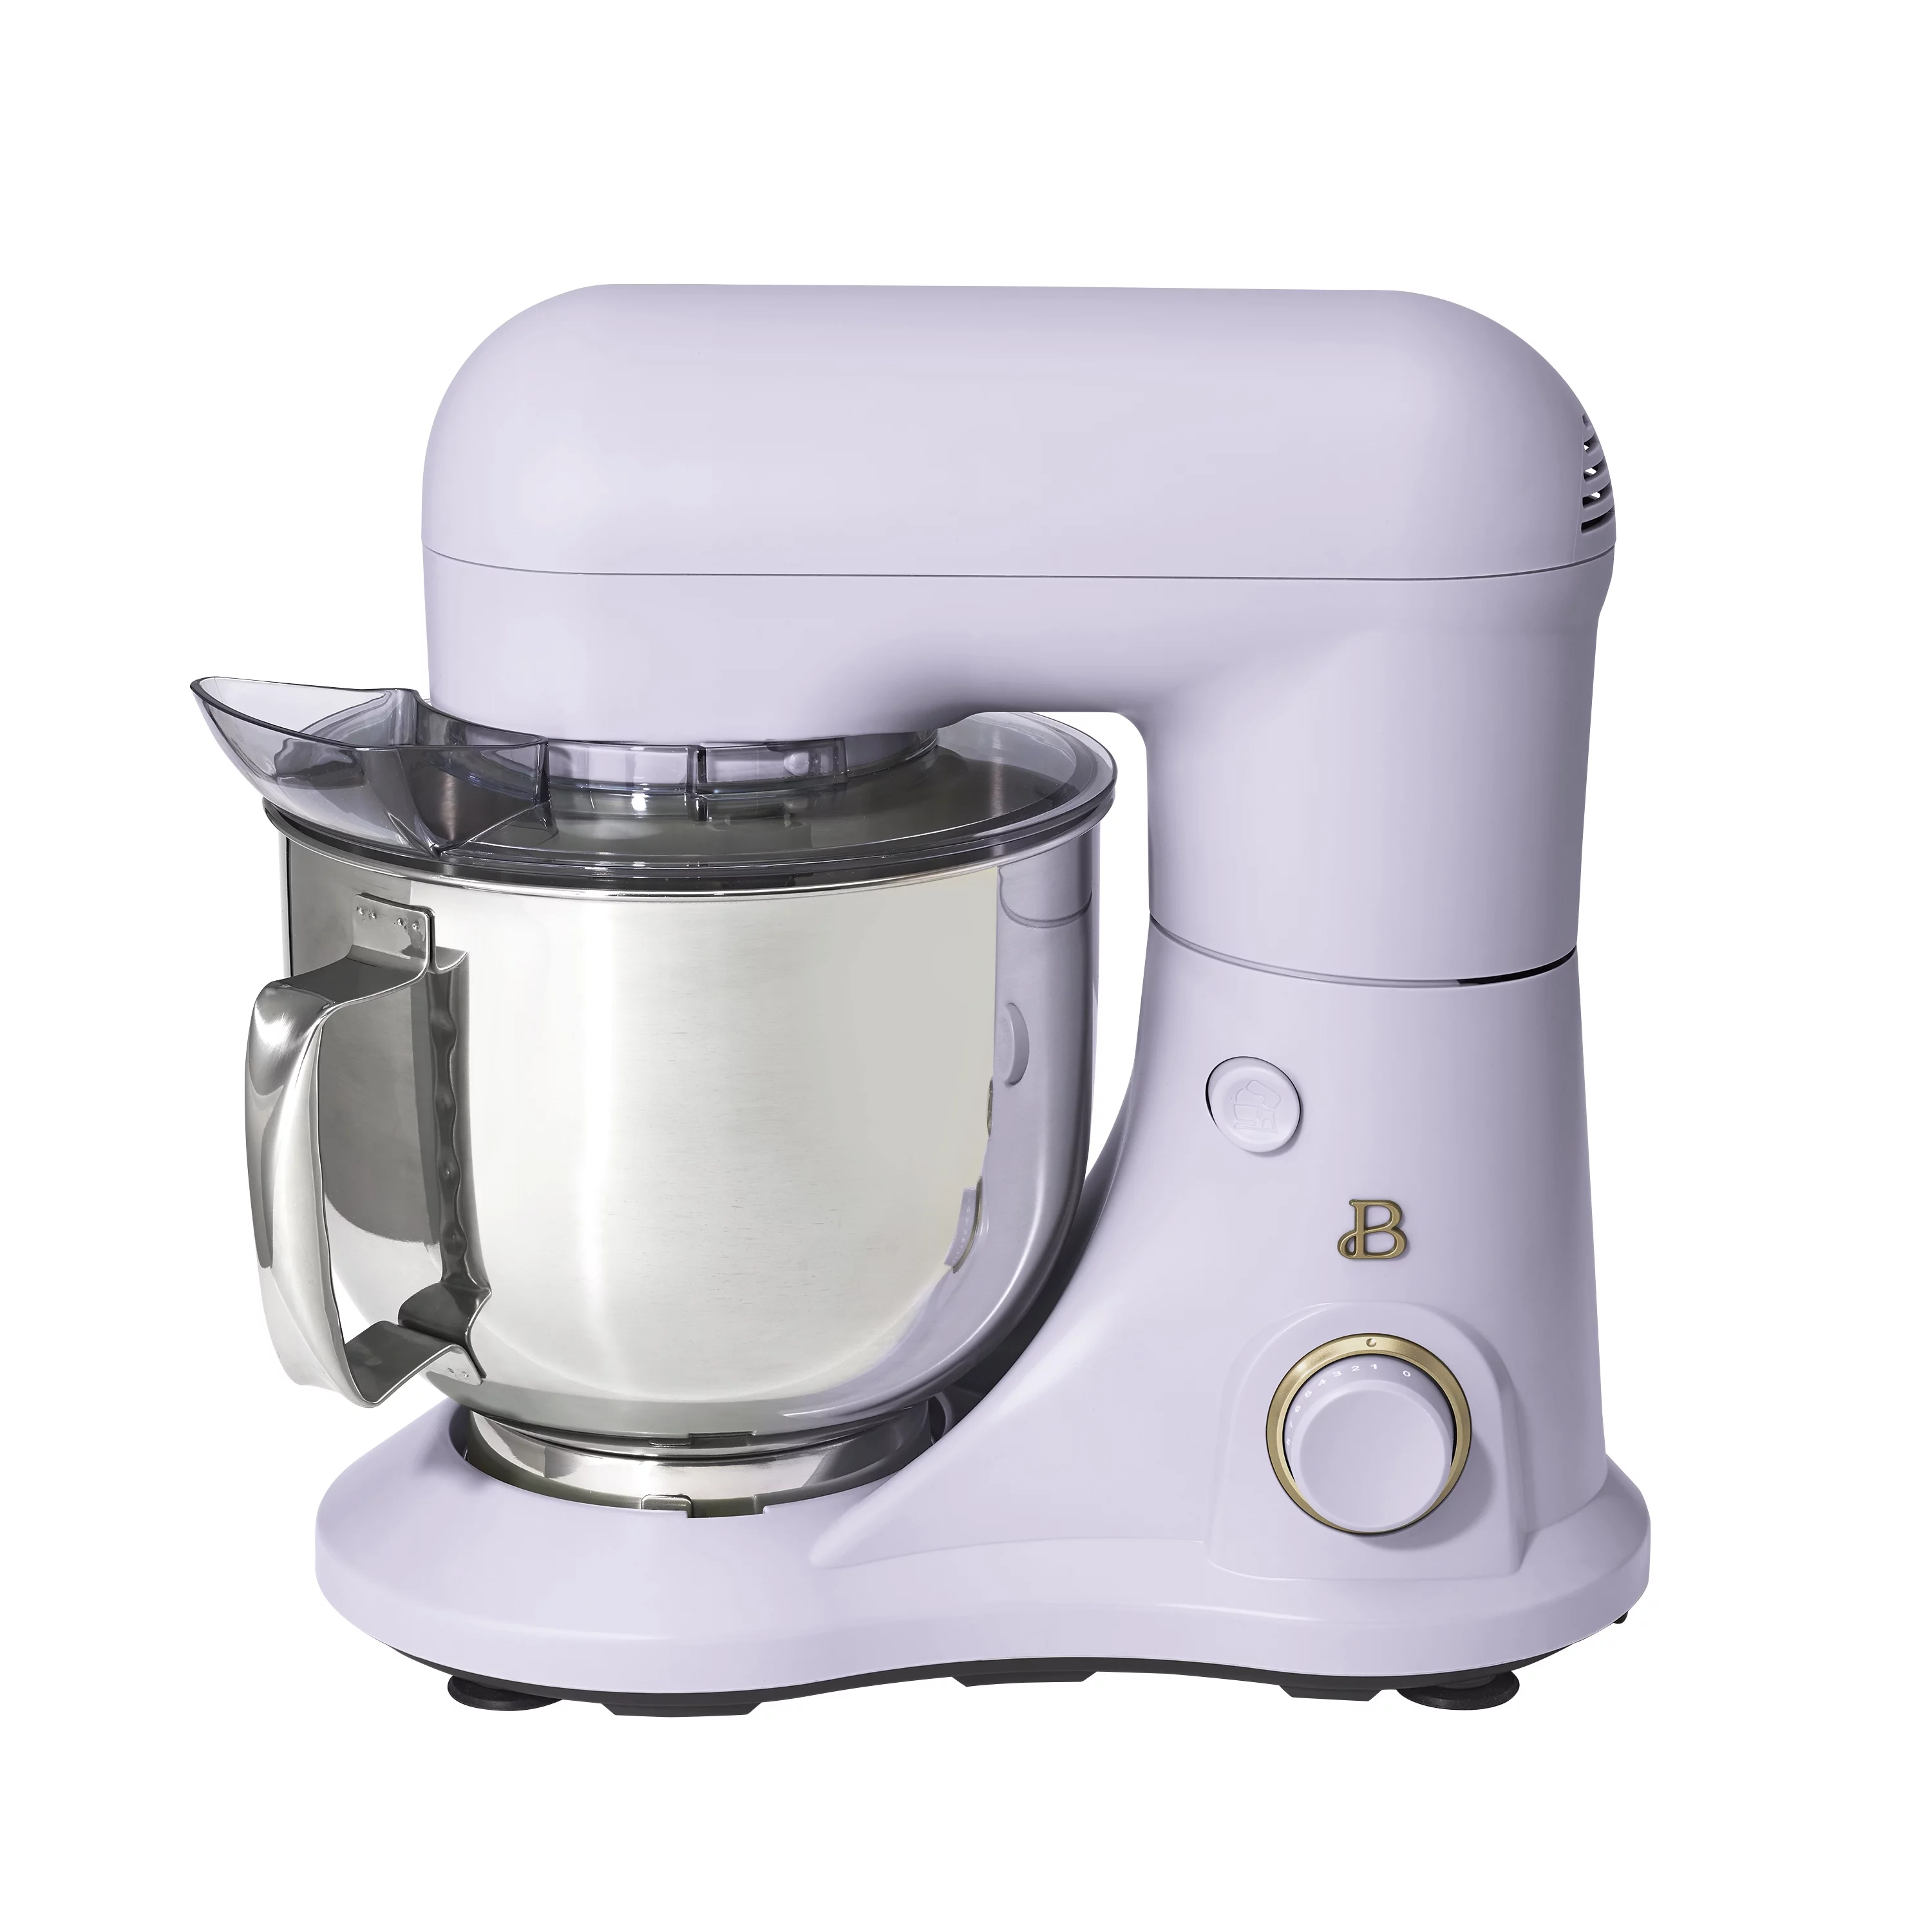 Beautiful 5.3 Qt Stand Mixer, Lightweight & Powerful with Tilt-Head, Lavender by Drew Barrymore